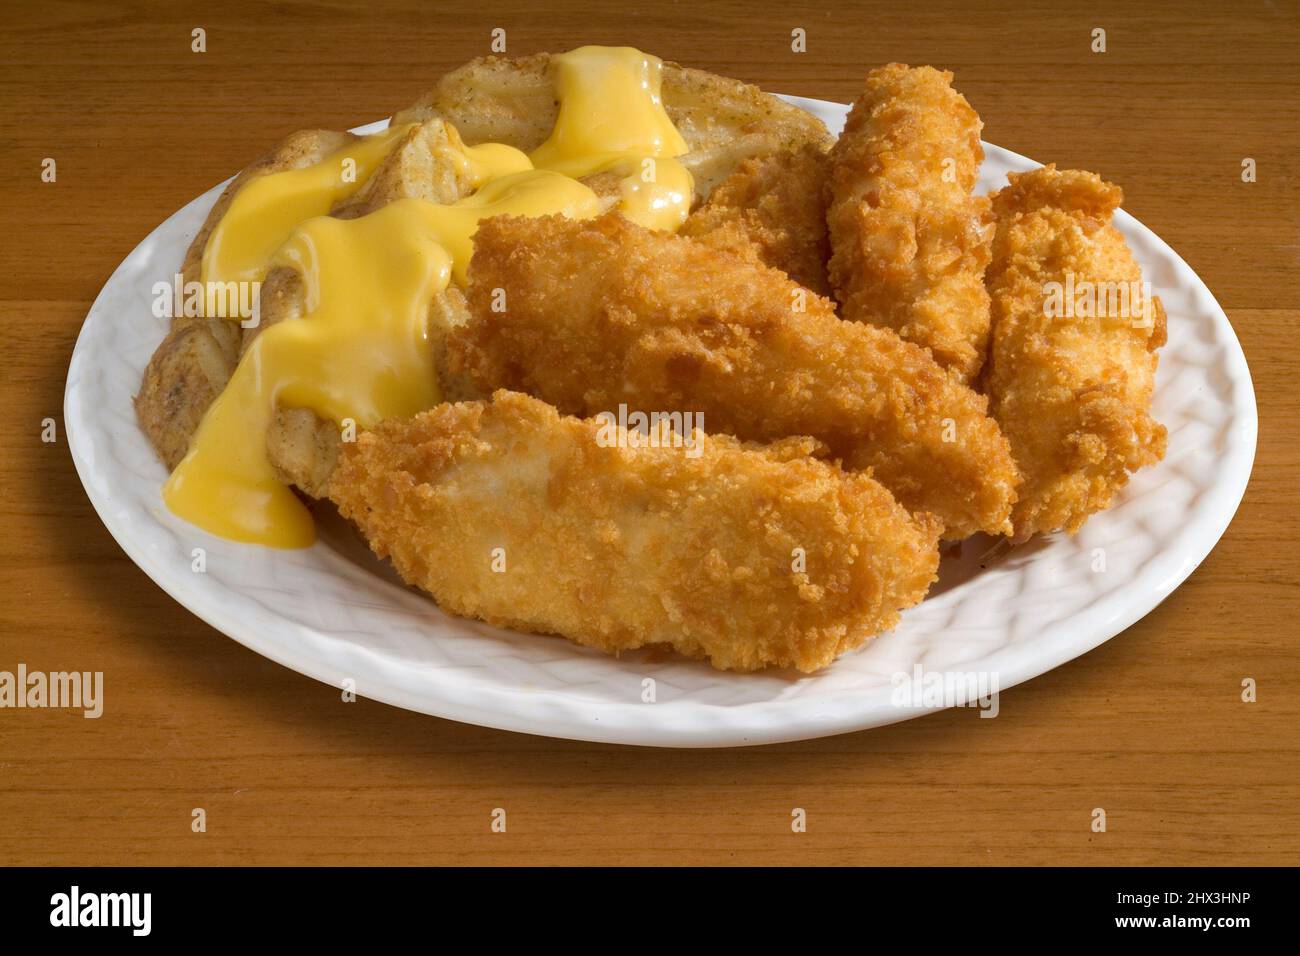 Chicken fingers and potato wedges Stock Photo